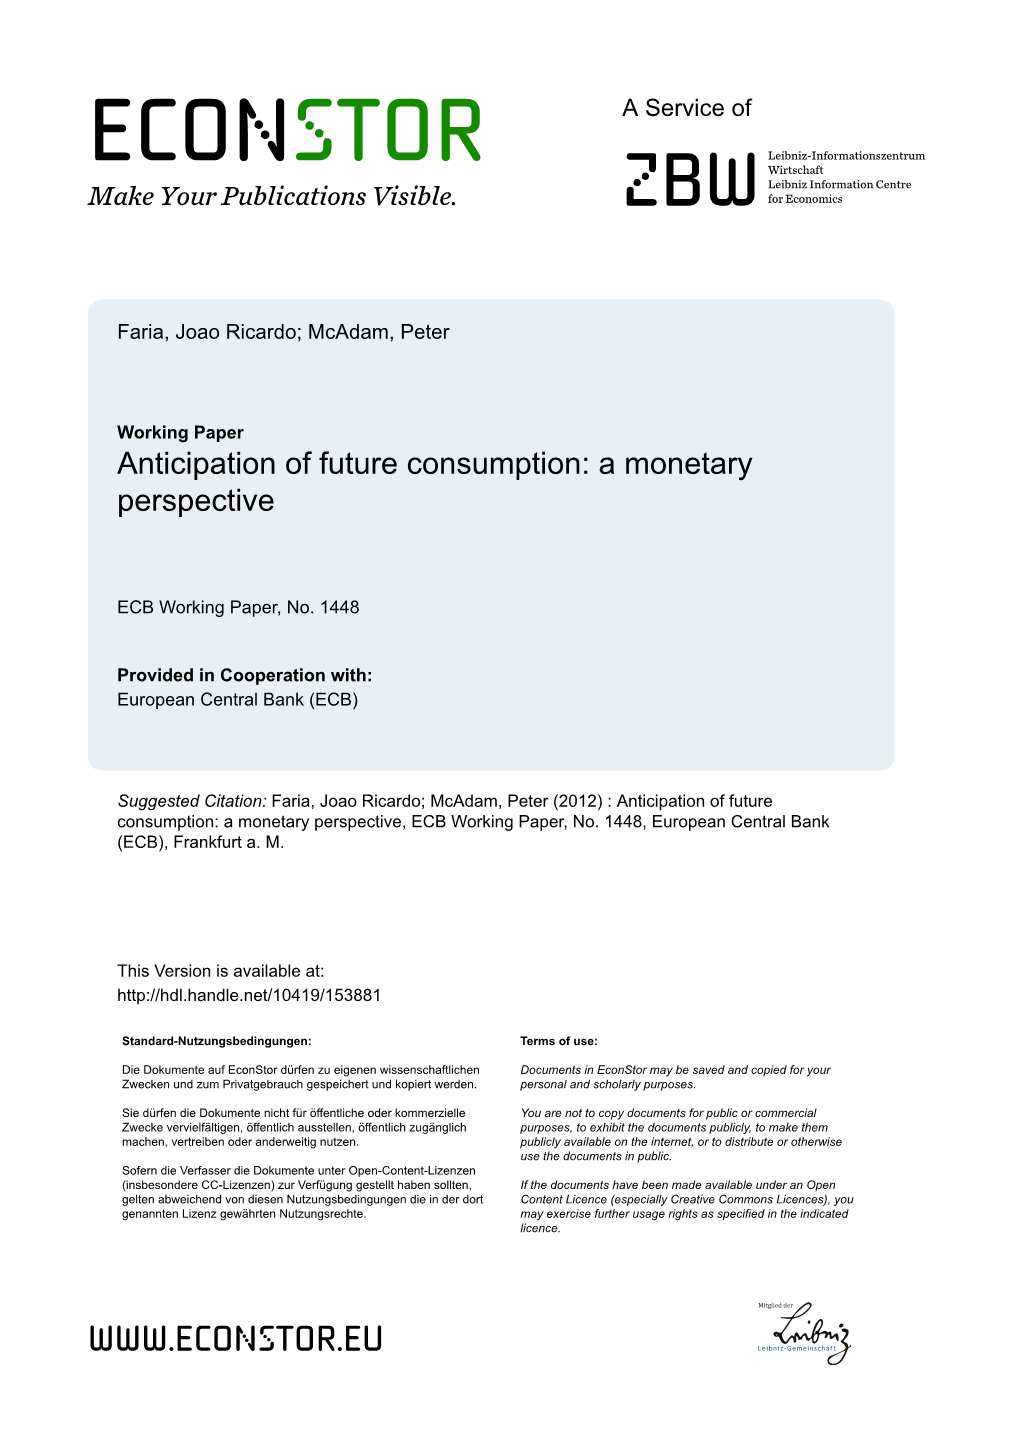 Anticipation of Future Consumption: a Monetary Perspective